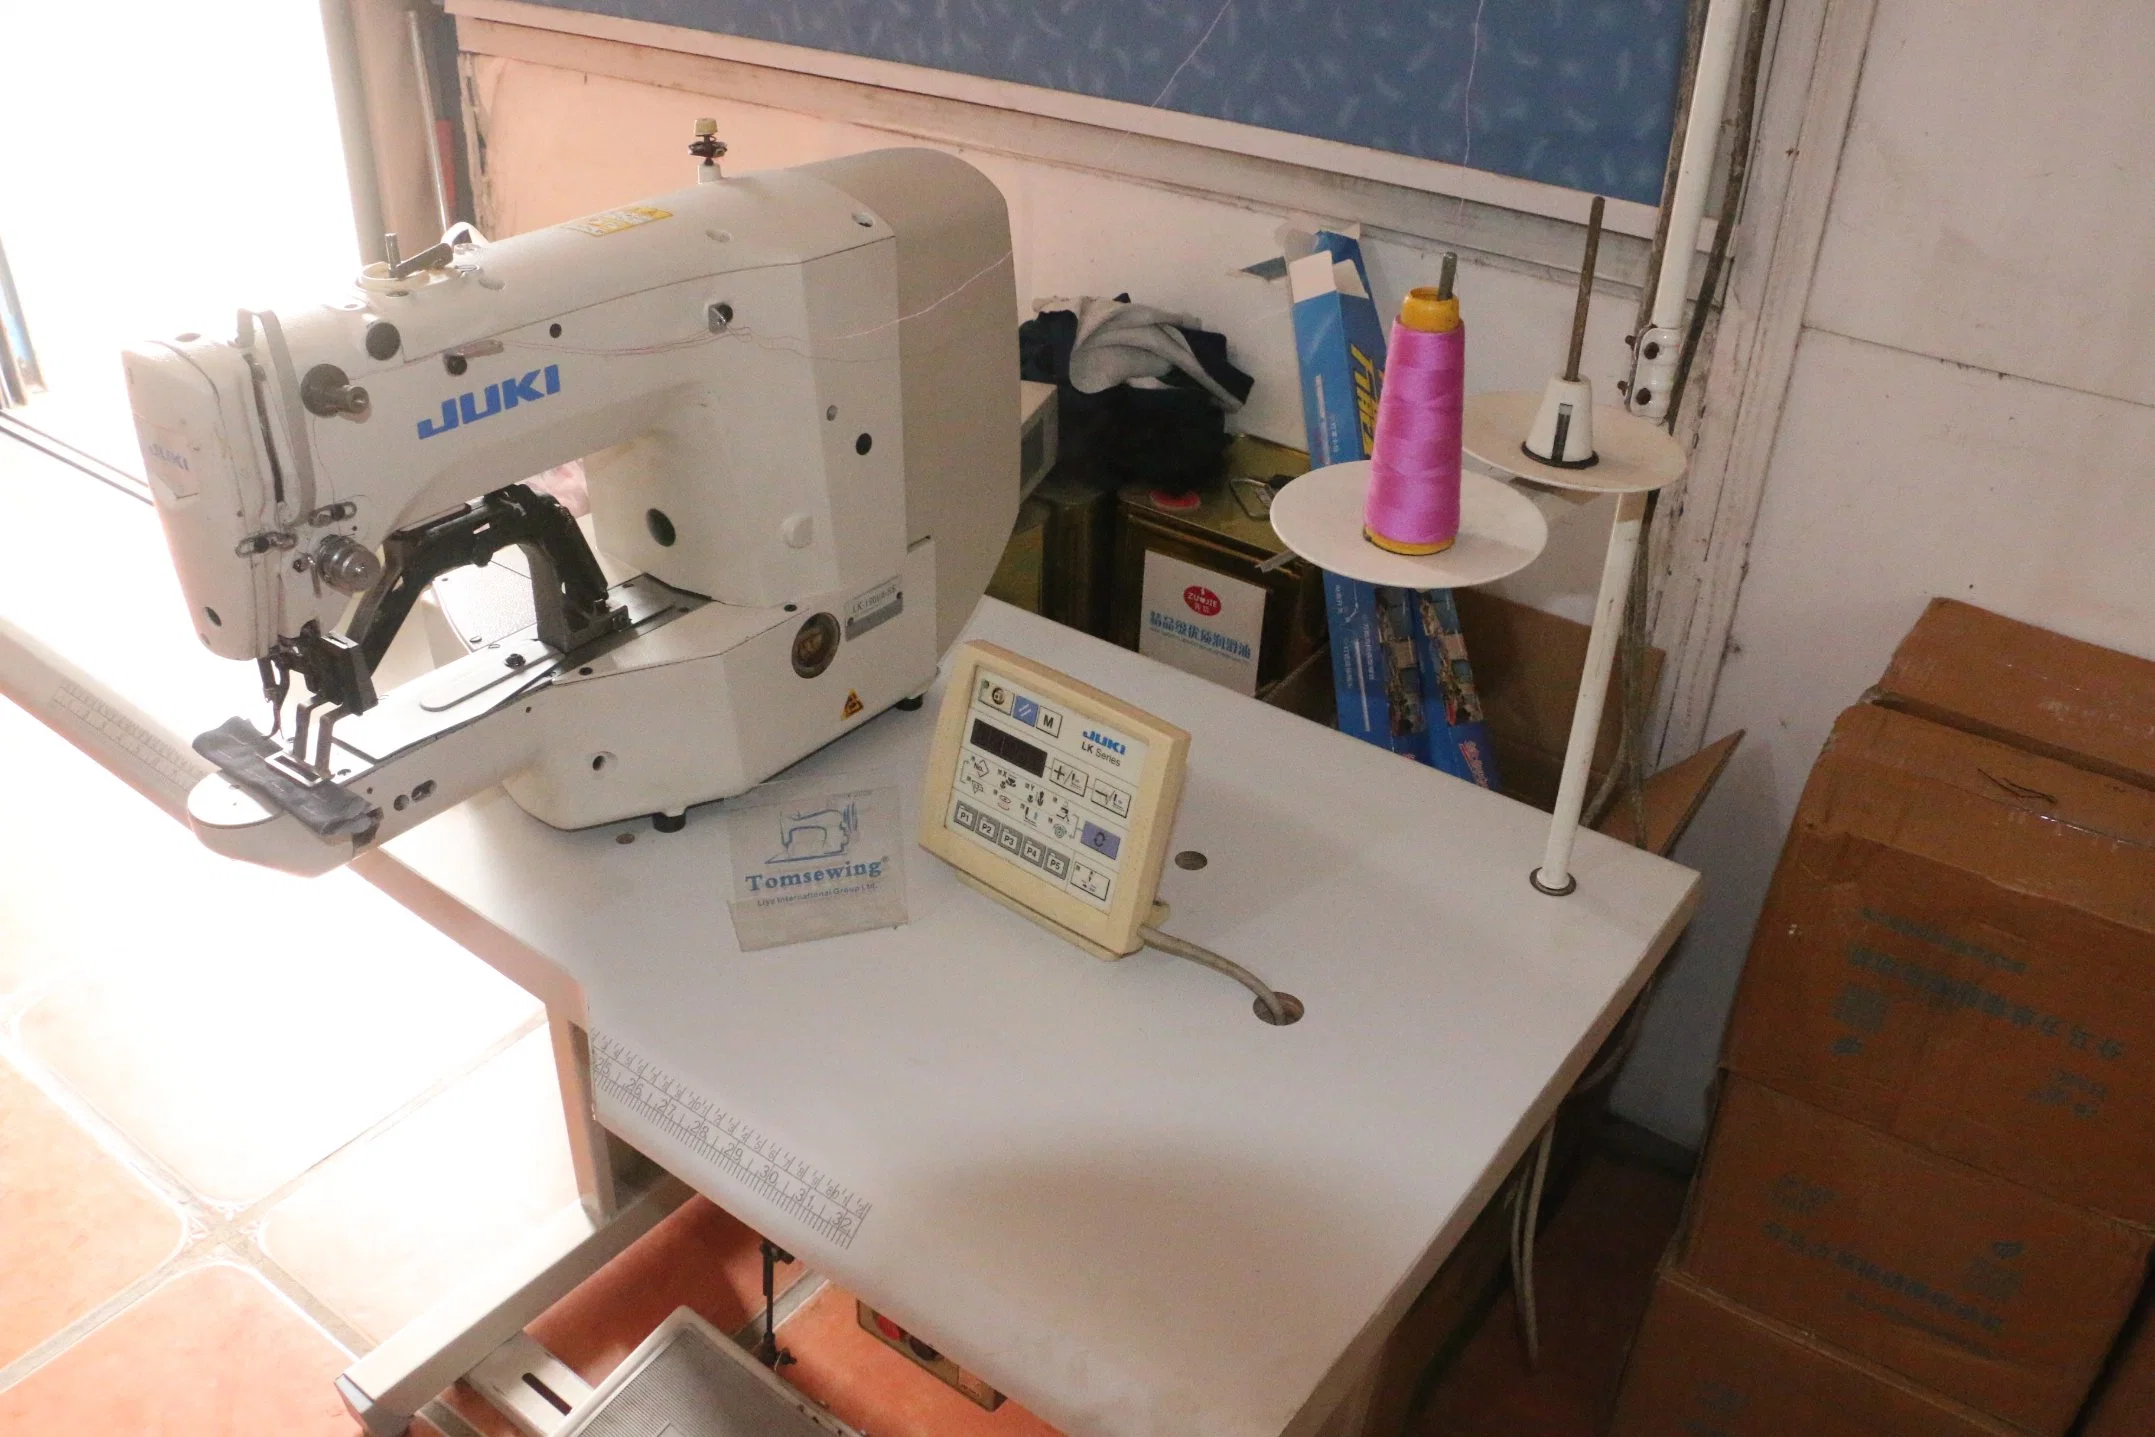 Programmable Used Bartacking Sewing Machine Secondhand Electronic Juki Lk 1900A Old 2ND Maquinas De Coser Industriales Usedas